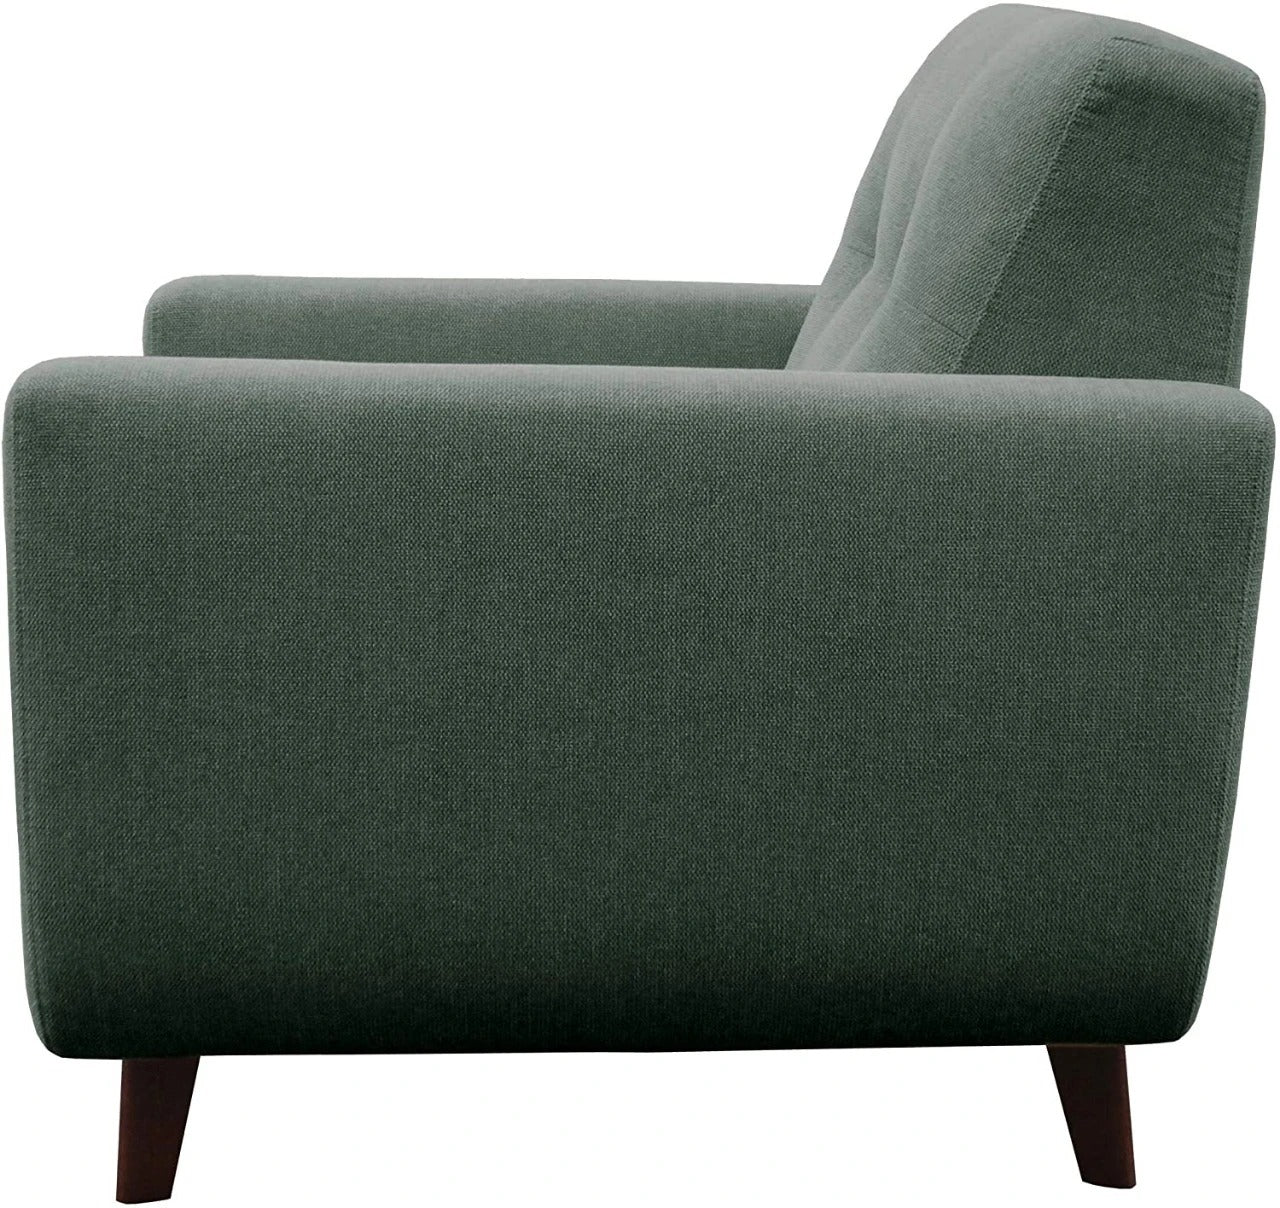 Sofa Chair : Storm Grey Armchair with Tapered Legs